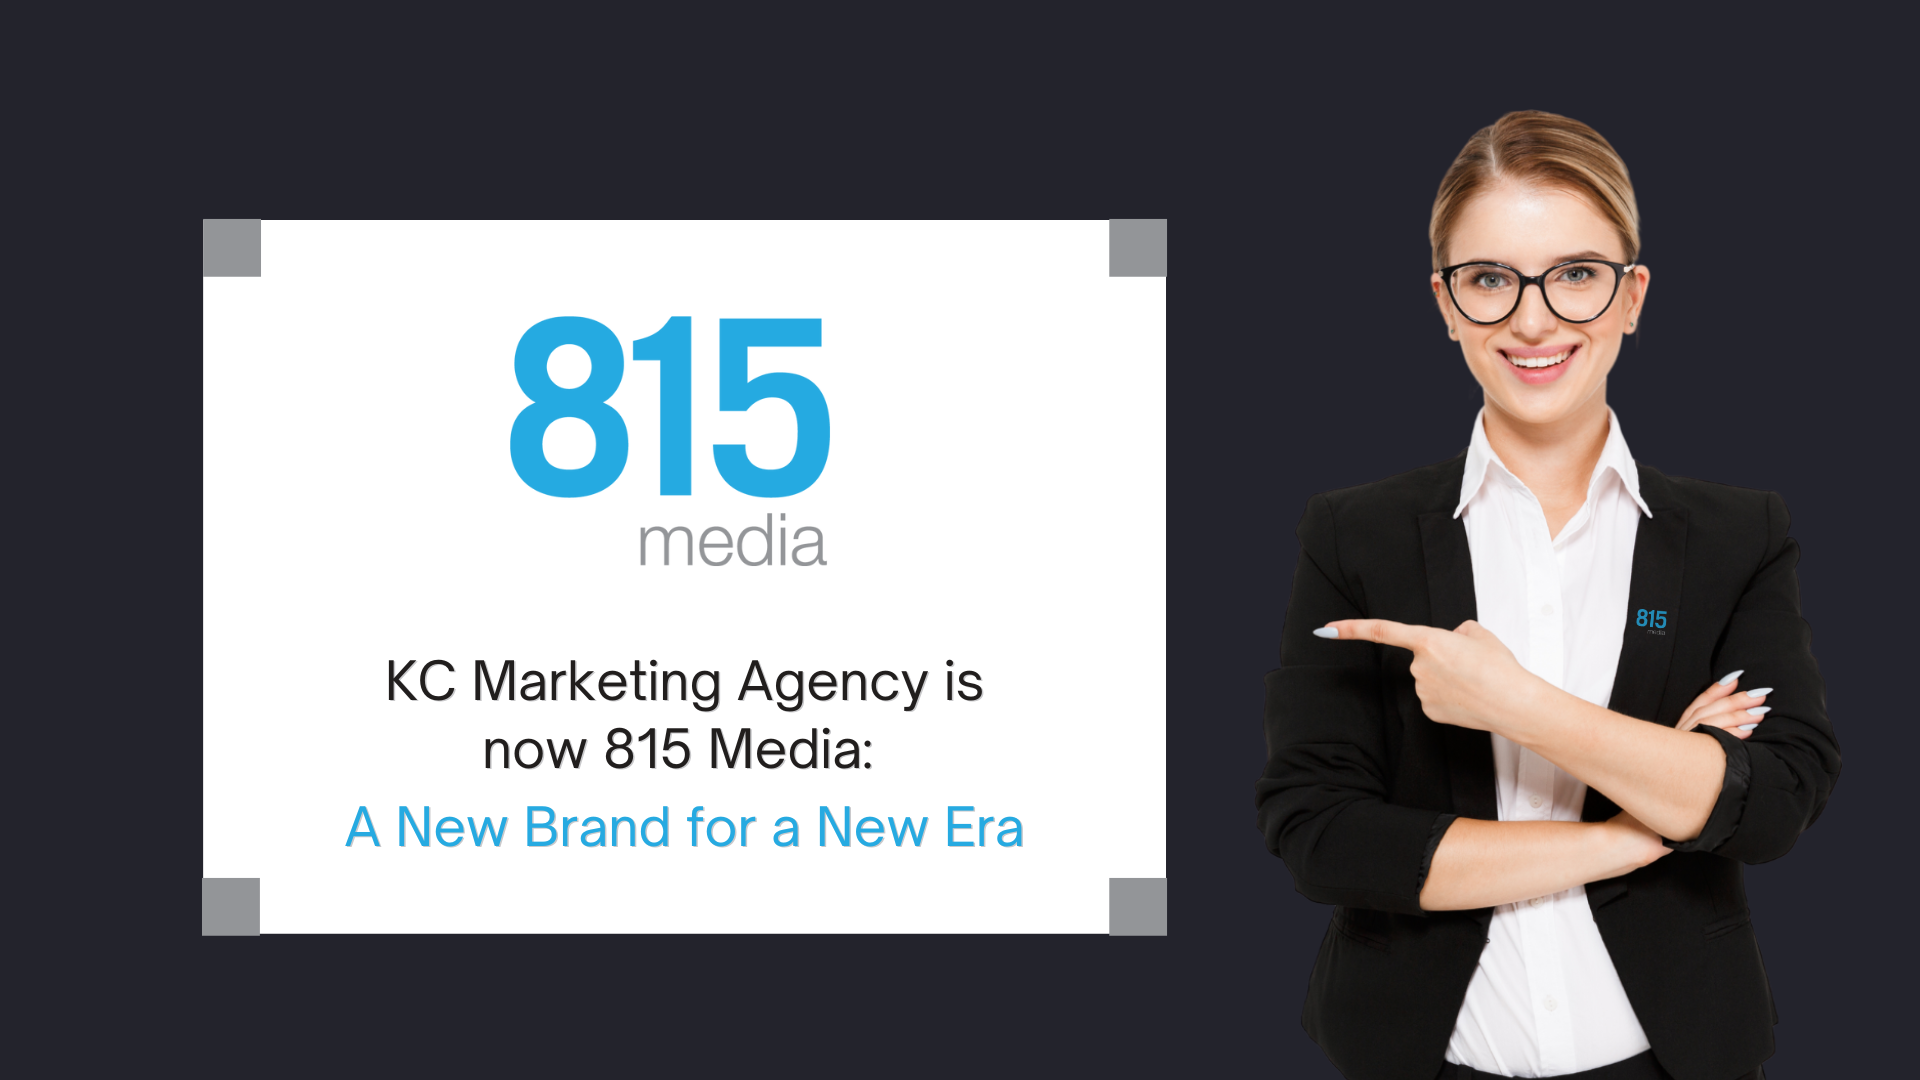 815 Media - A New Brand for a New Era